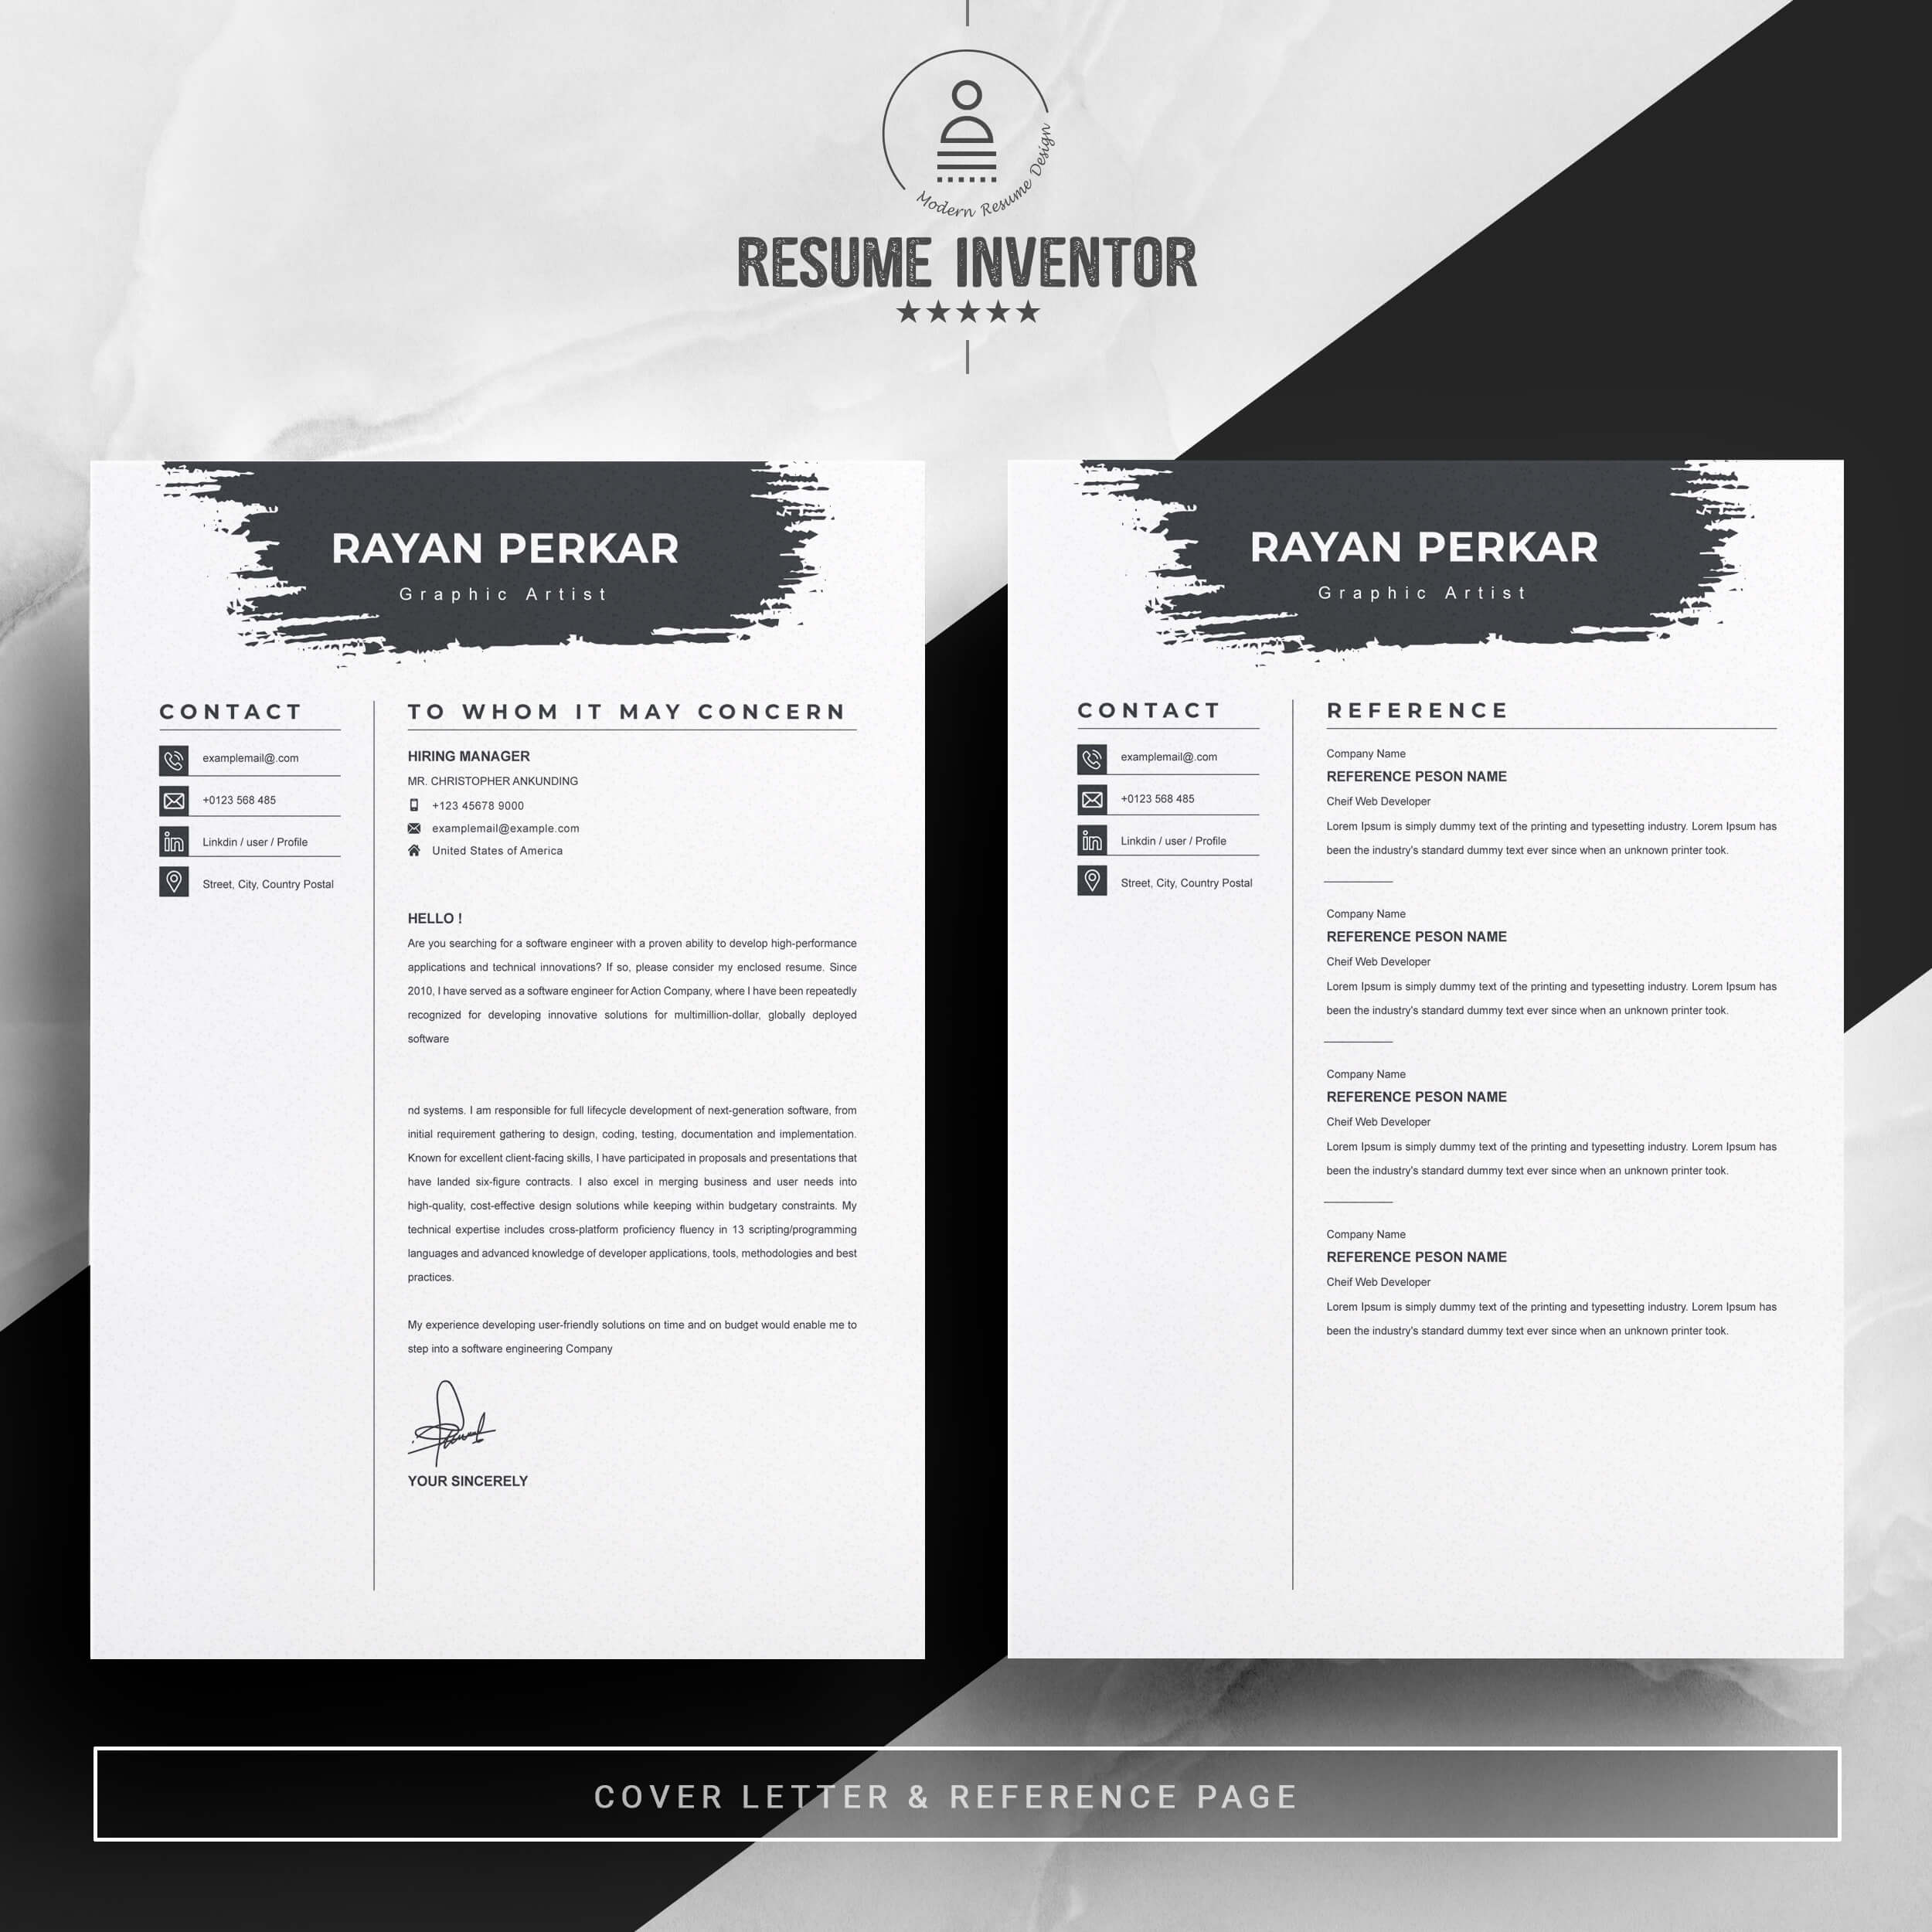 03 2 pages free resume design template 3 202